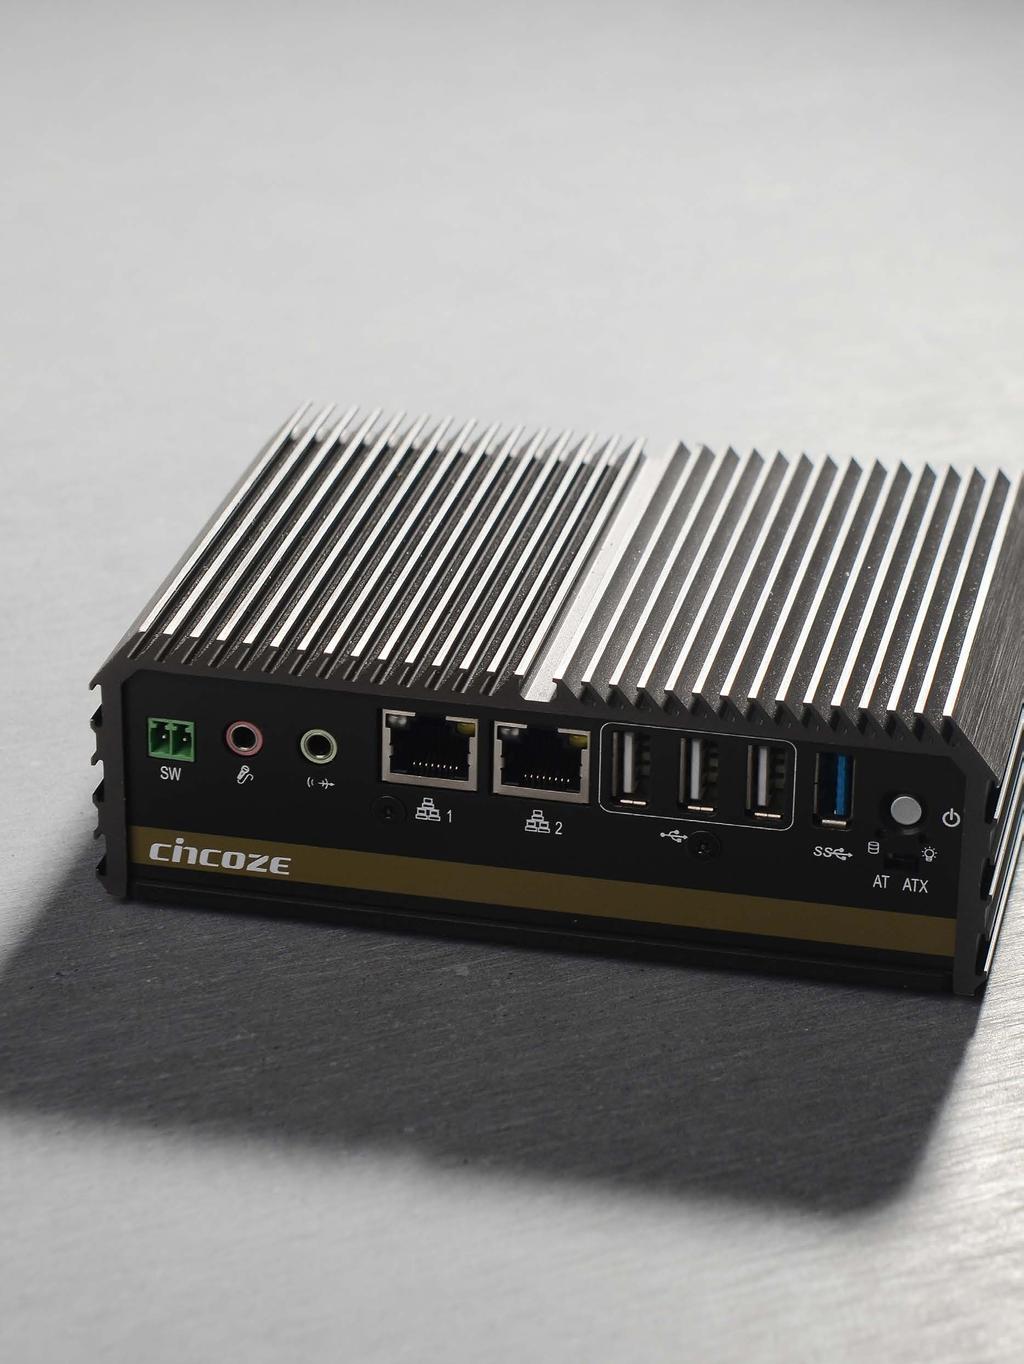 DA-1000 series is an ultra-compact size fanless embedded computer powered by Intel